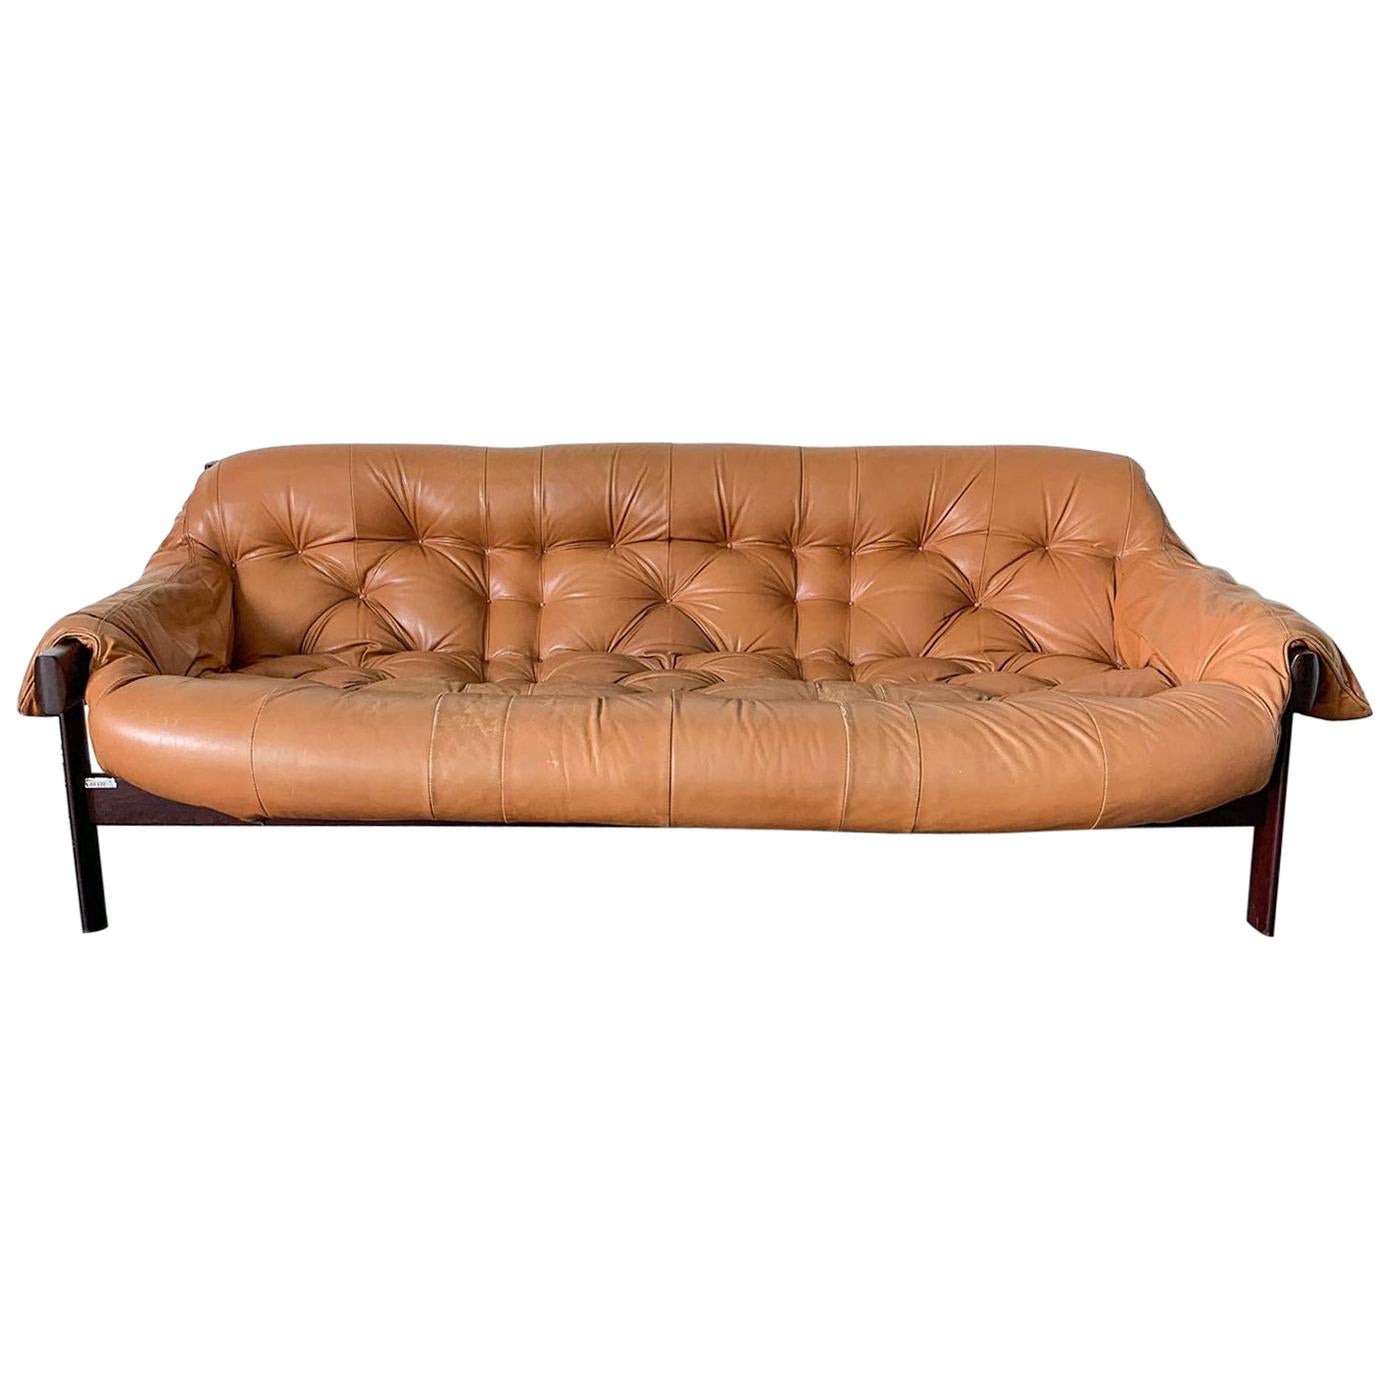 Percival Lafer Cognac Leather and Brazilian Rosewood Sofa MP-41 Series